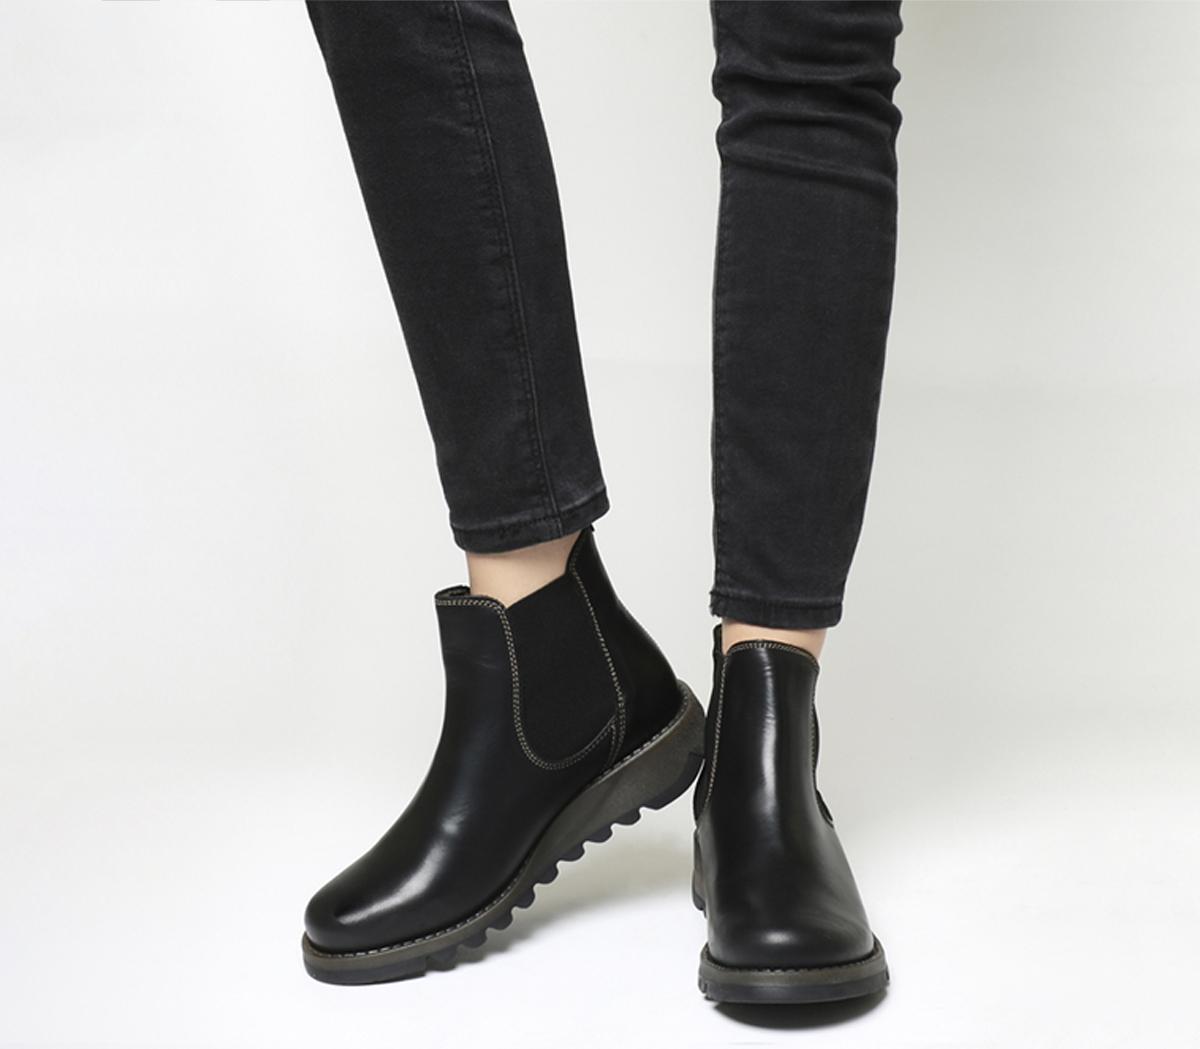 fly chelsea boots sale